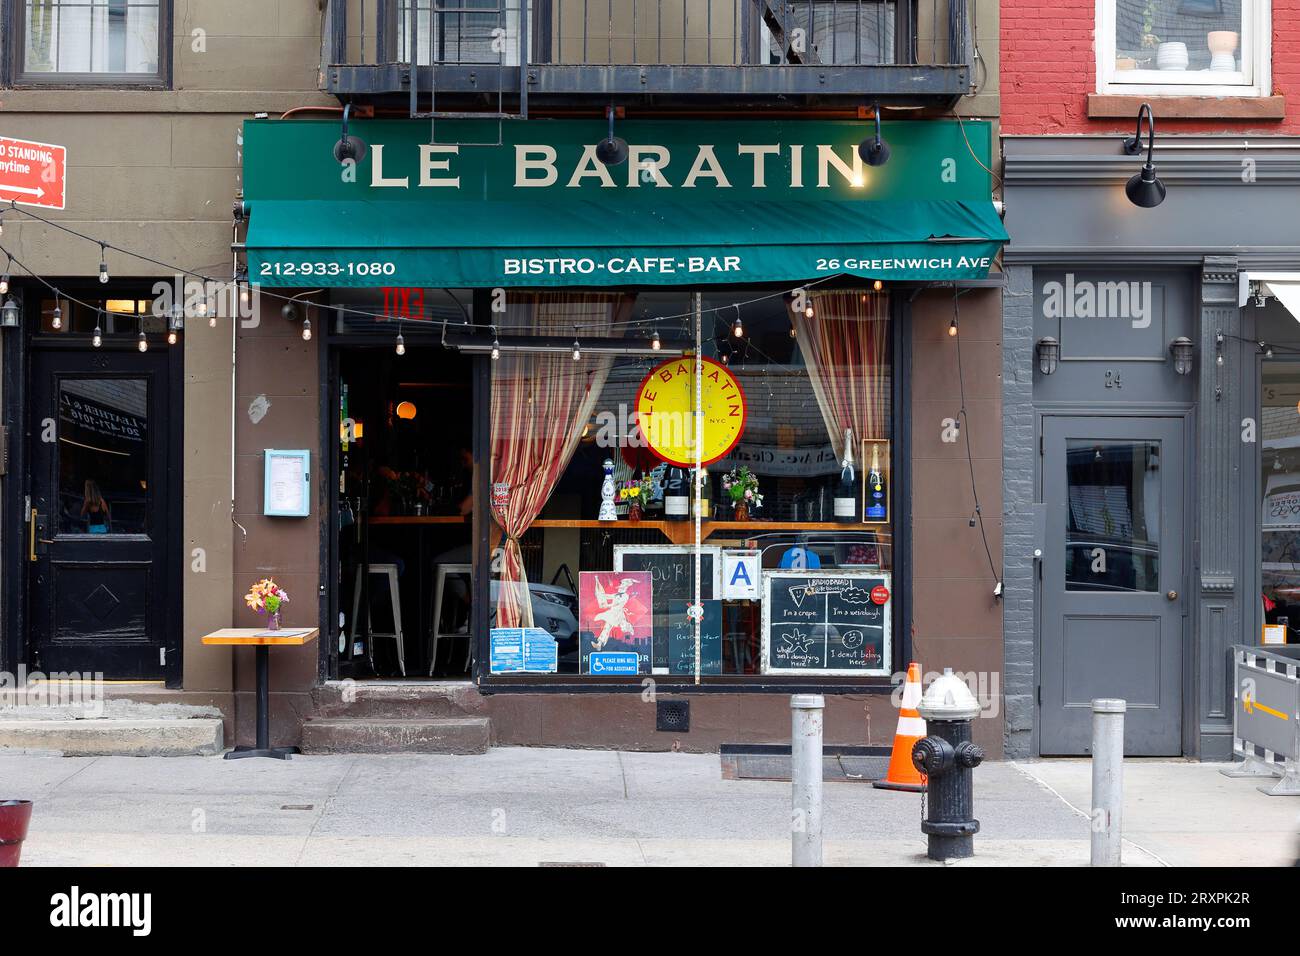 Le Baratin, 26 Greenwich Ave, New York. NYC storefront photo of a French bistro in Manhattan's Greenwich Village neighborhood. Stock Photo